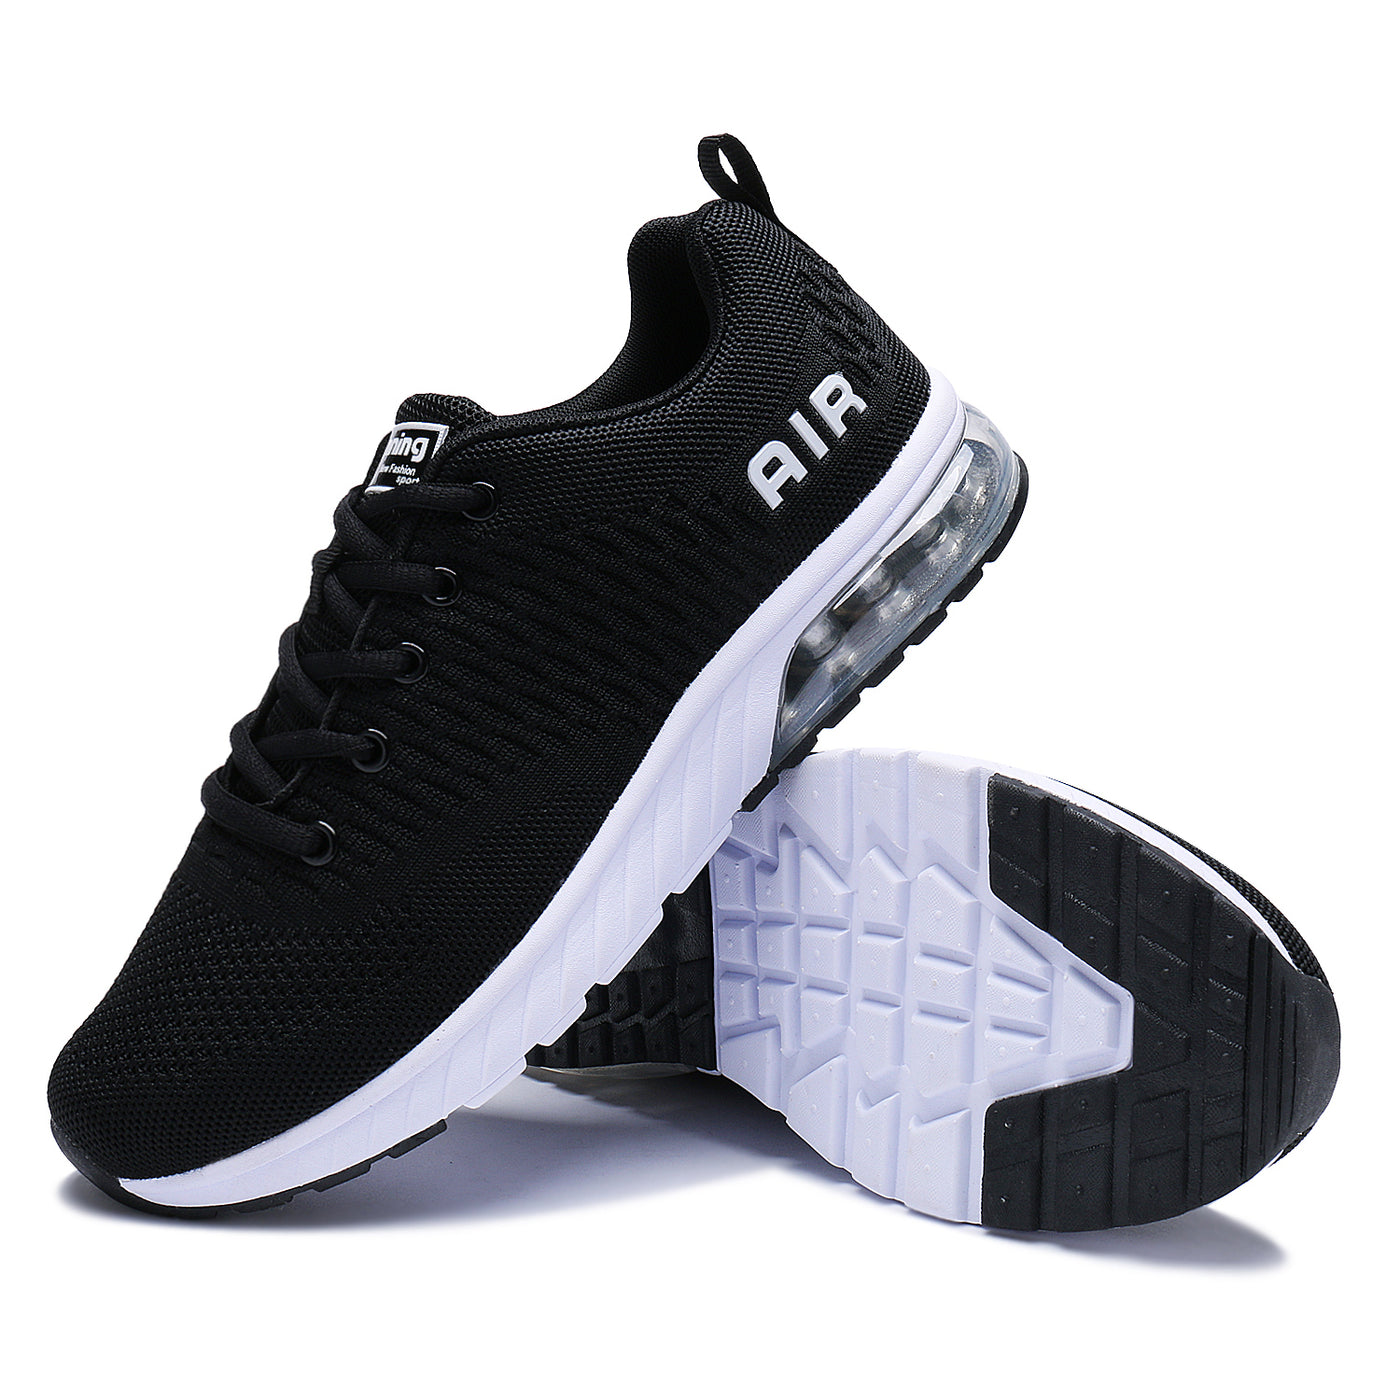 Ladies Stretch Knit Sneakers Breathable Sports Tennis